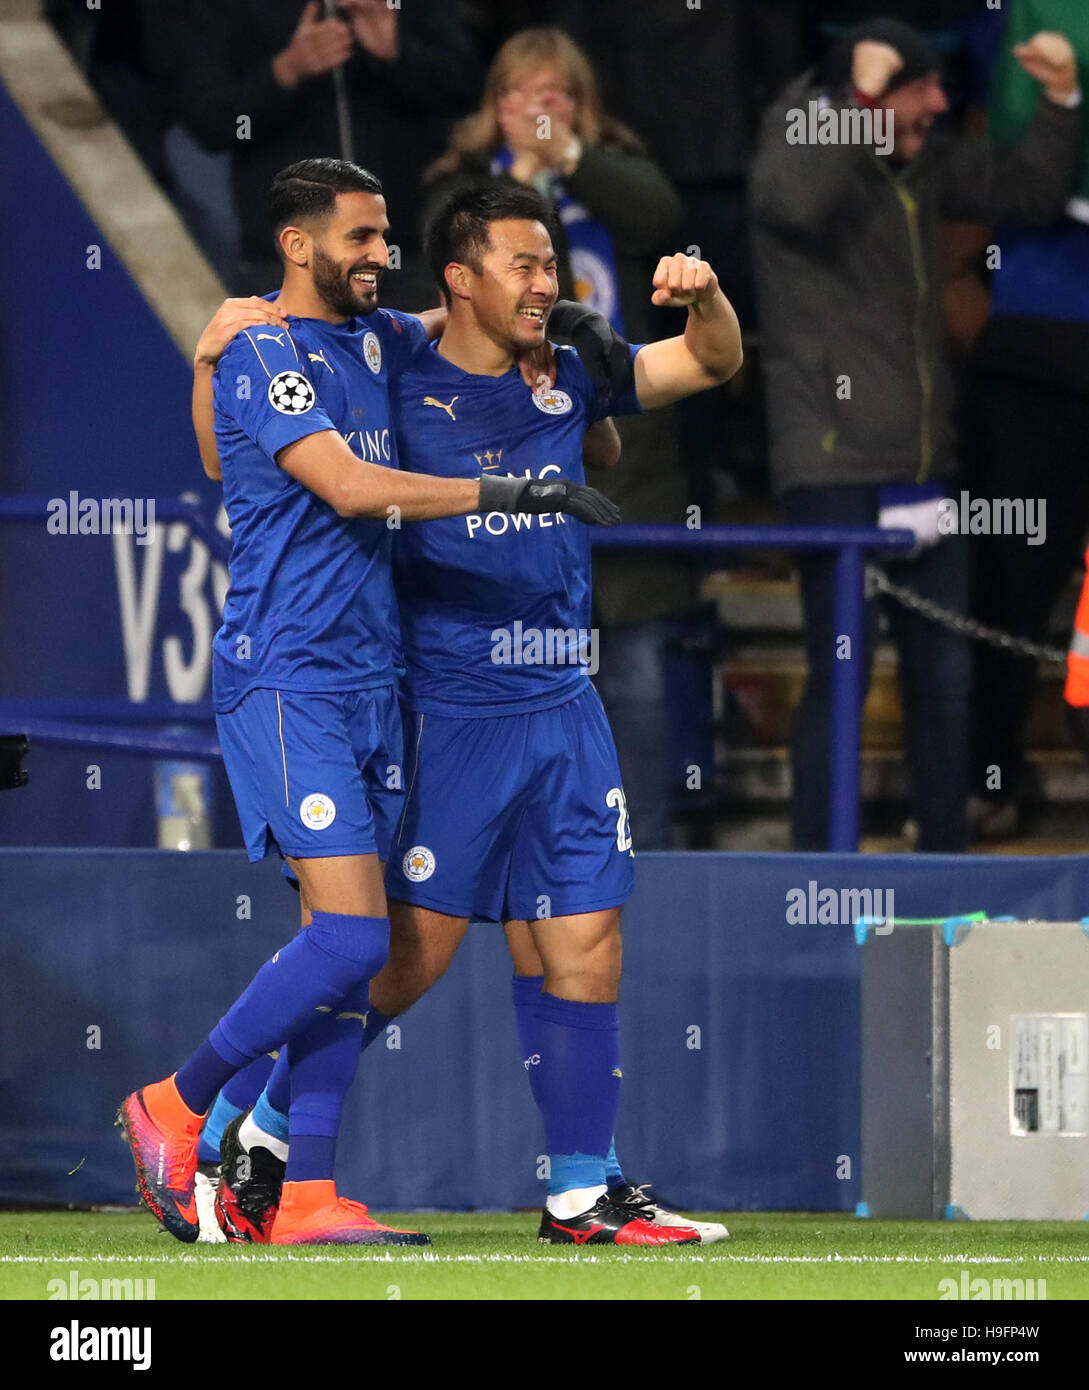 Leicester City S Shinji Okazaki Celebrates Scoring His Sides Opening Goal With Riyad Mahrez Left During The Uefa Champions League Group Stage Match At The King Power Stadium Leicester Stock Photo Alamy